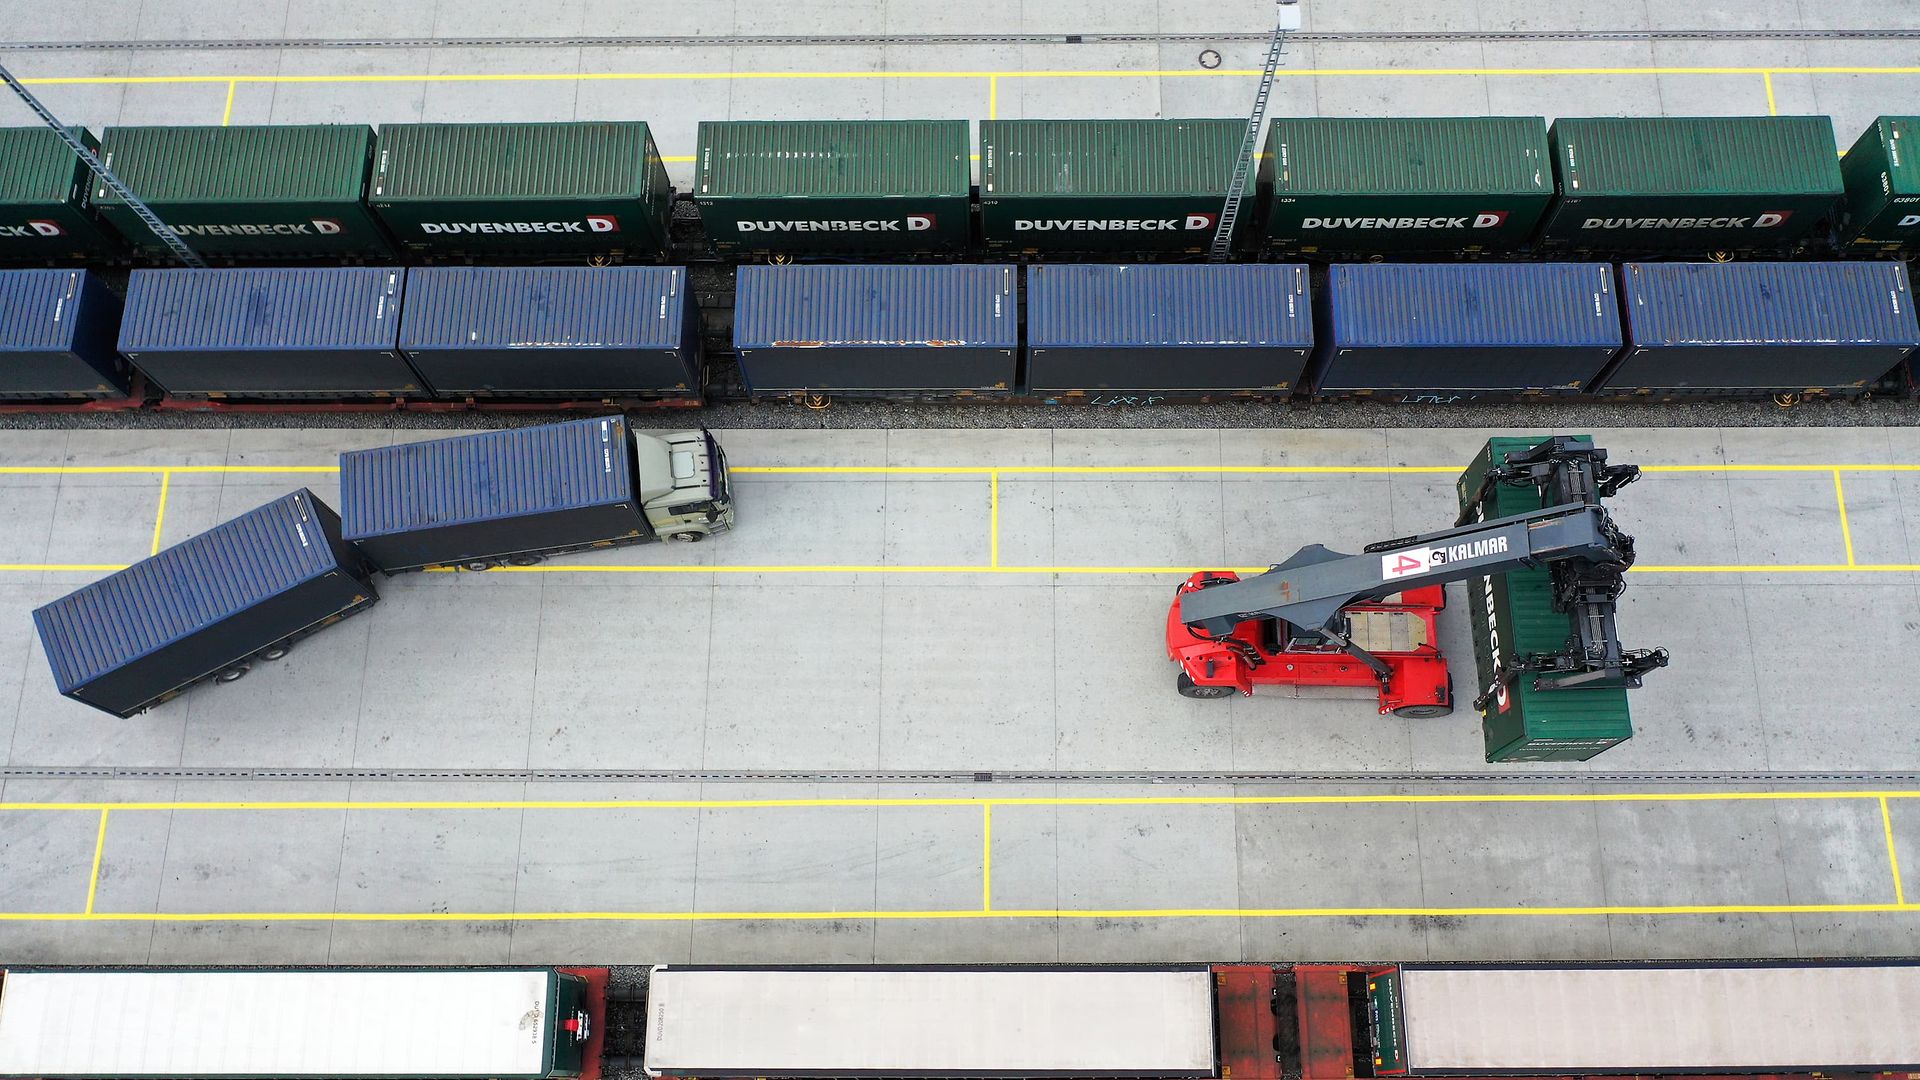 Reach stacker loads containers onto cargo train